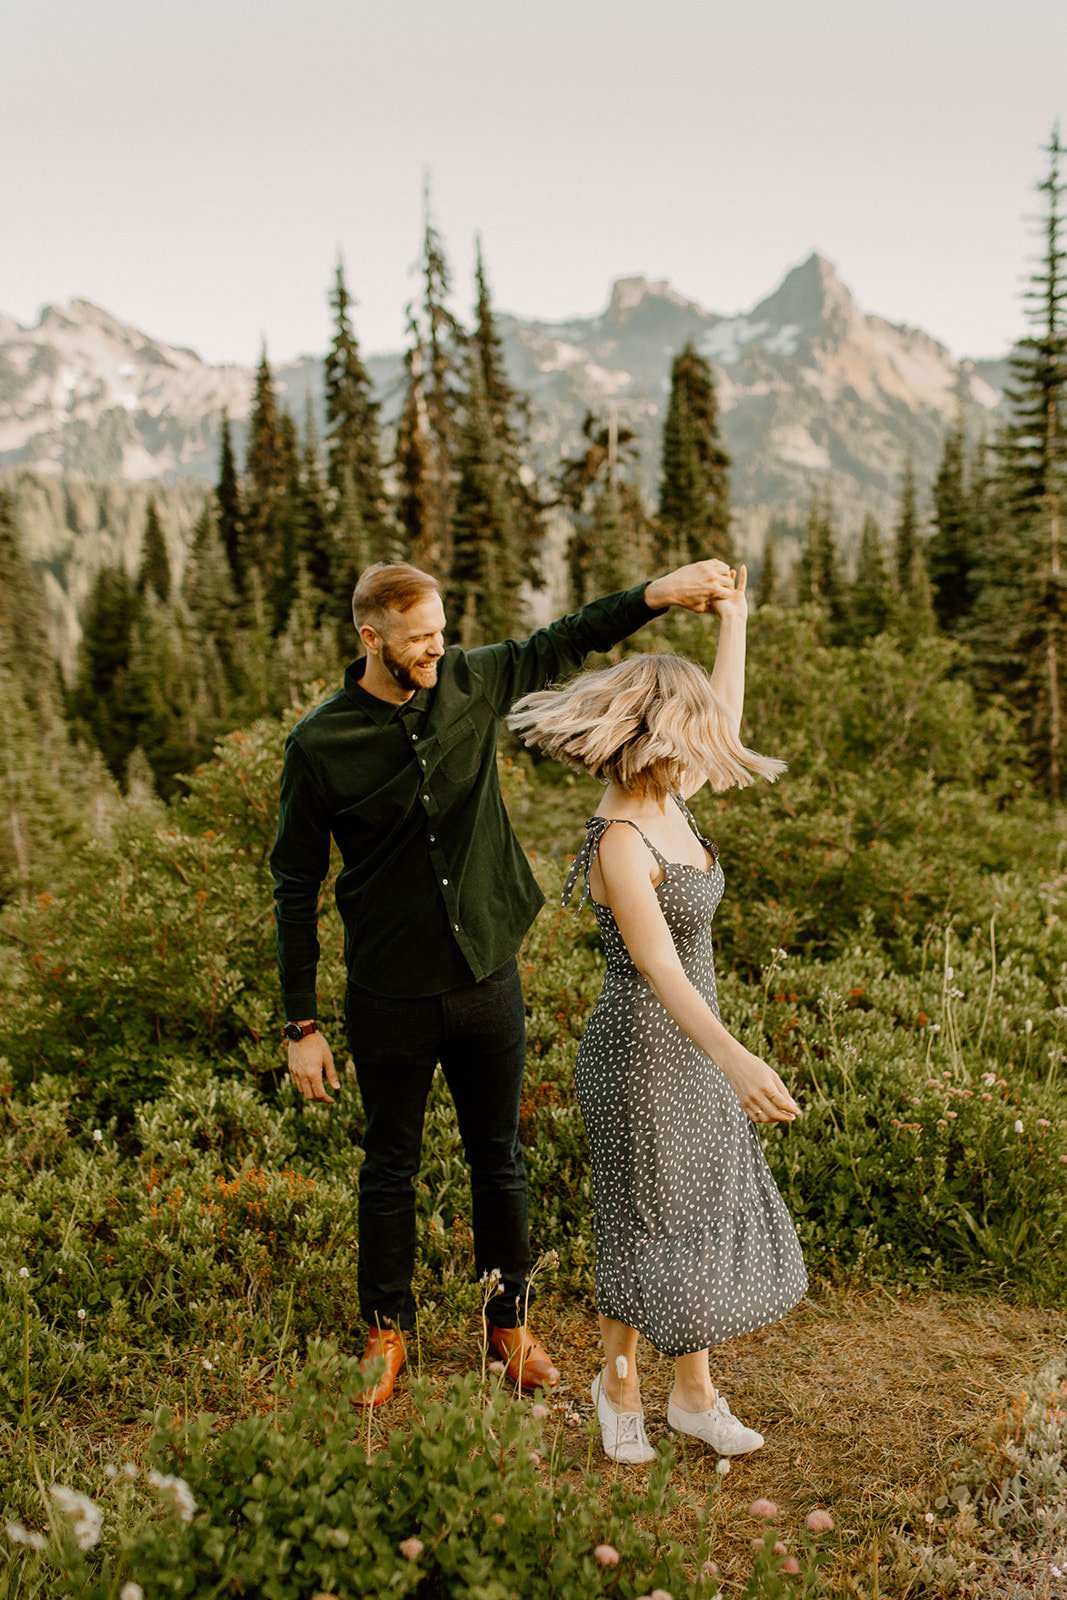 fiance twirling his partner in a meadow with mountains in the background